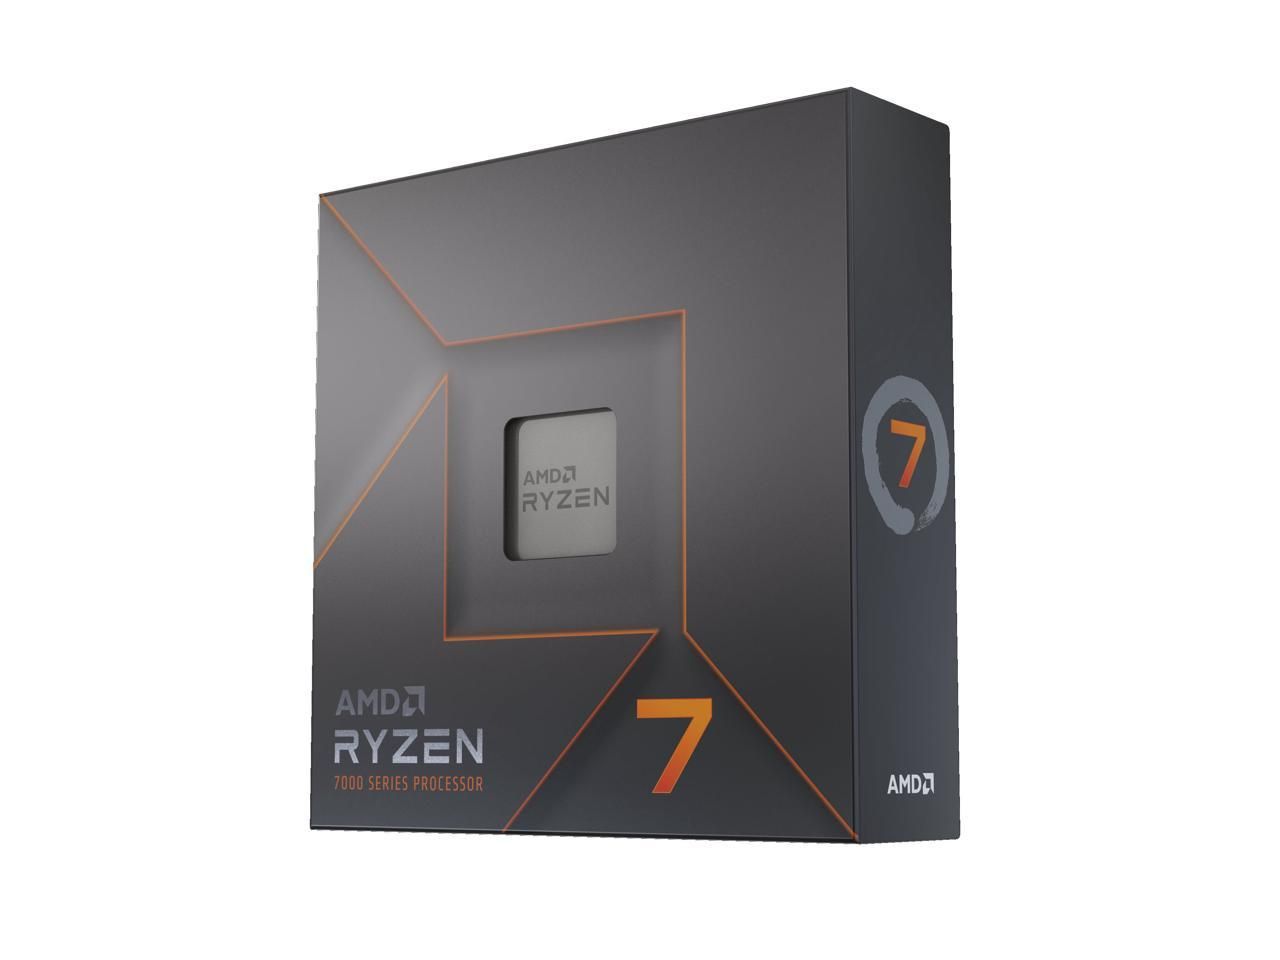 Compact view of the AMD Ryzen 7 7700X envelope